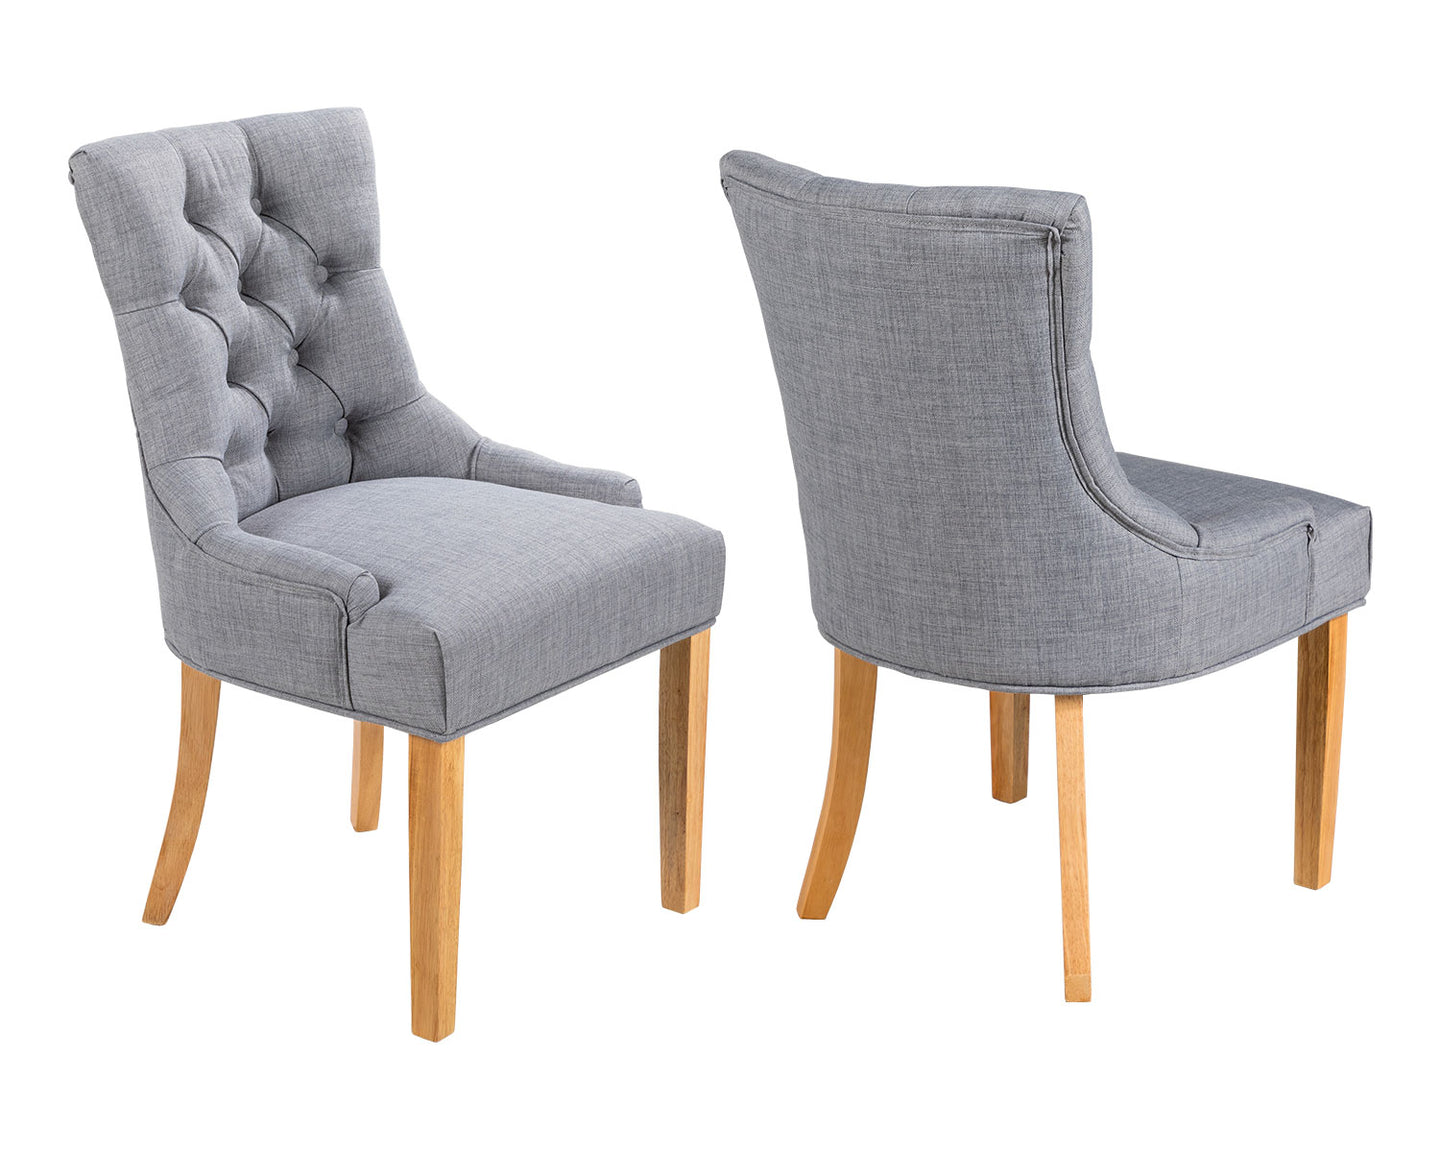 Chairs in Grey Linen